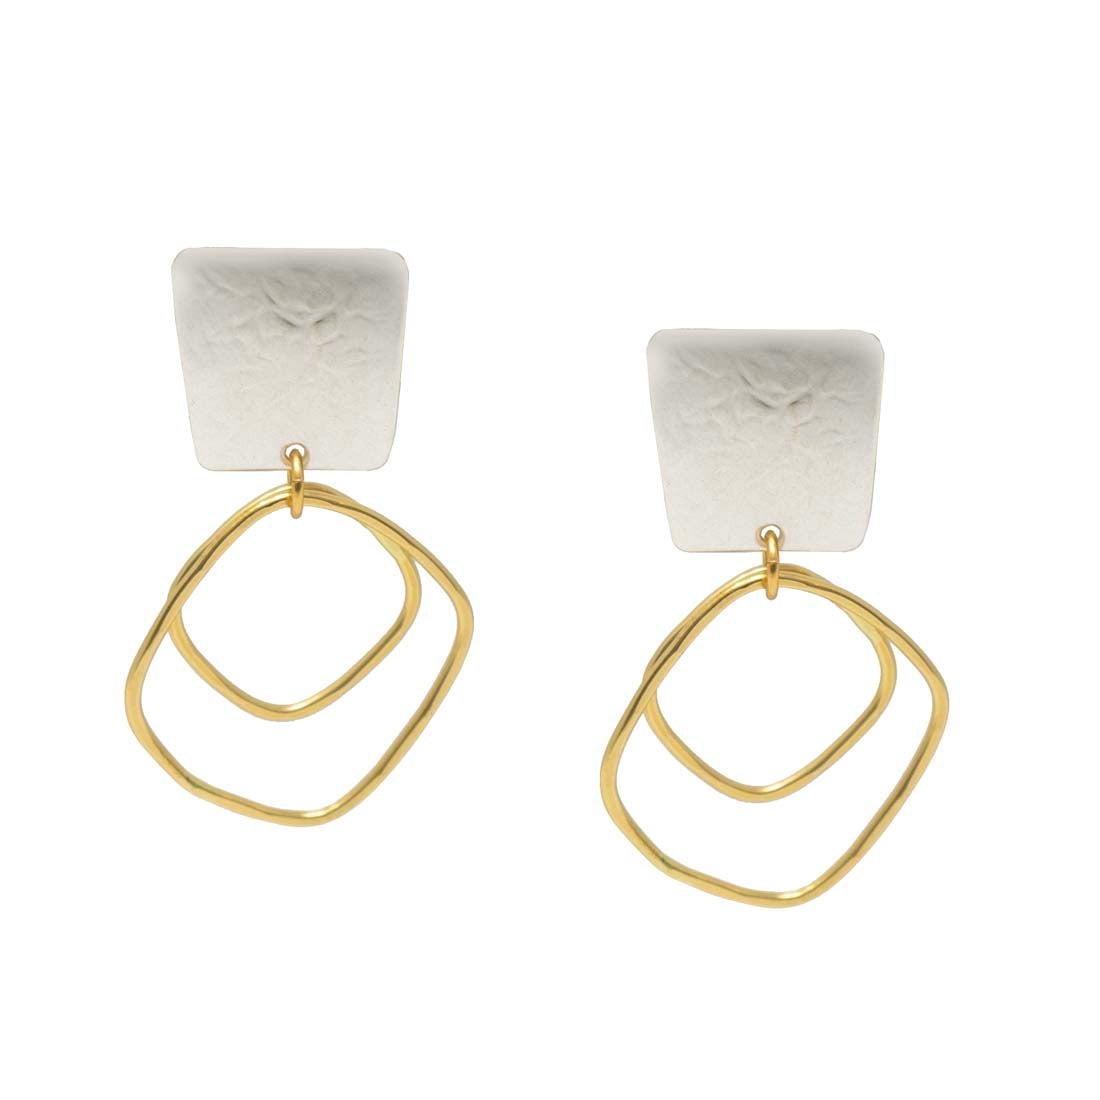 Tapered Square &amp; Interlocking Rings Clip-on Earrings